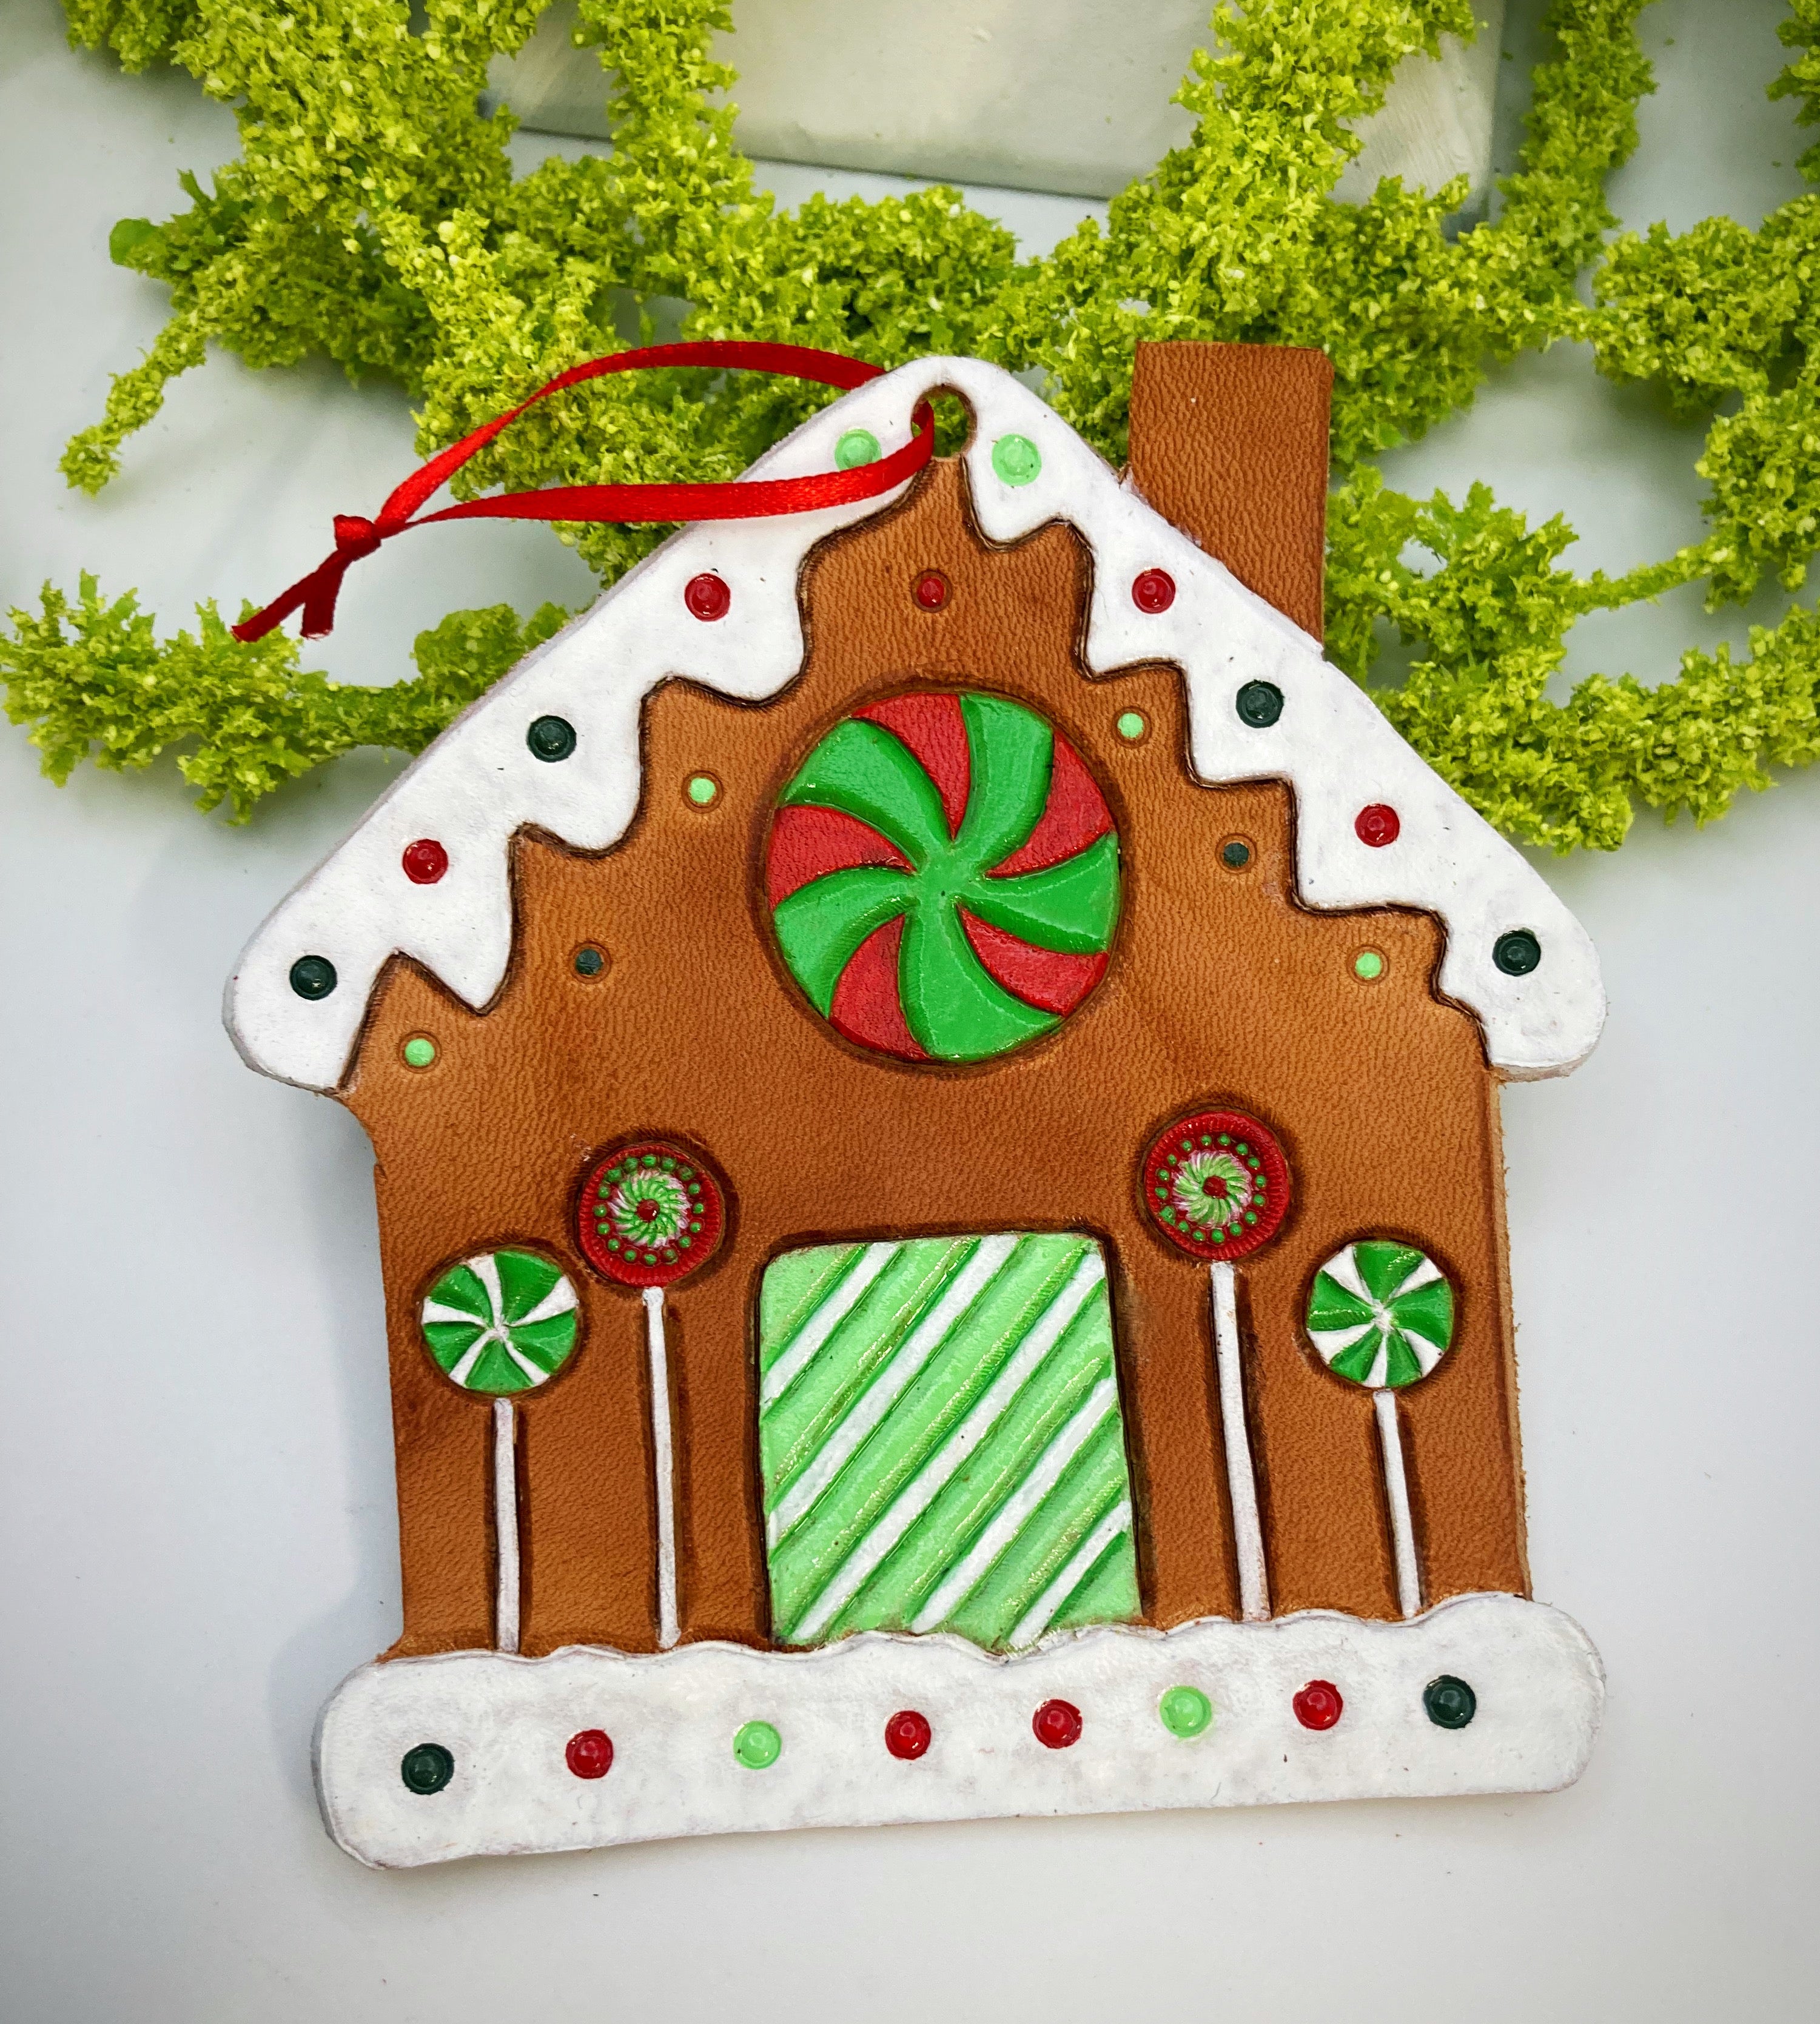 Tooled Leather Christmas Ornament - Gingerbread House